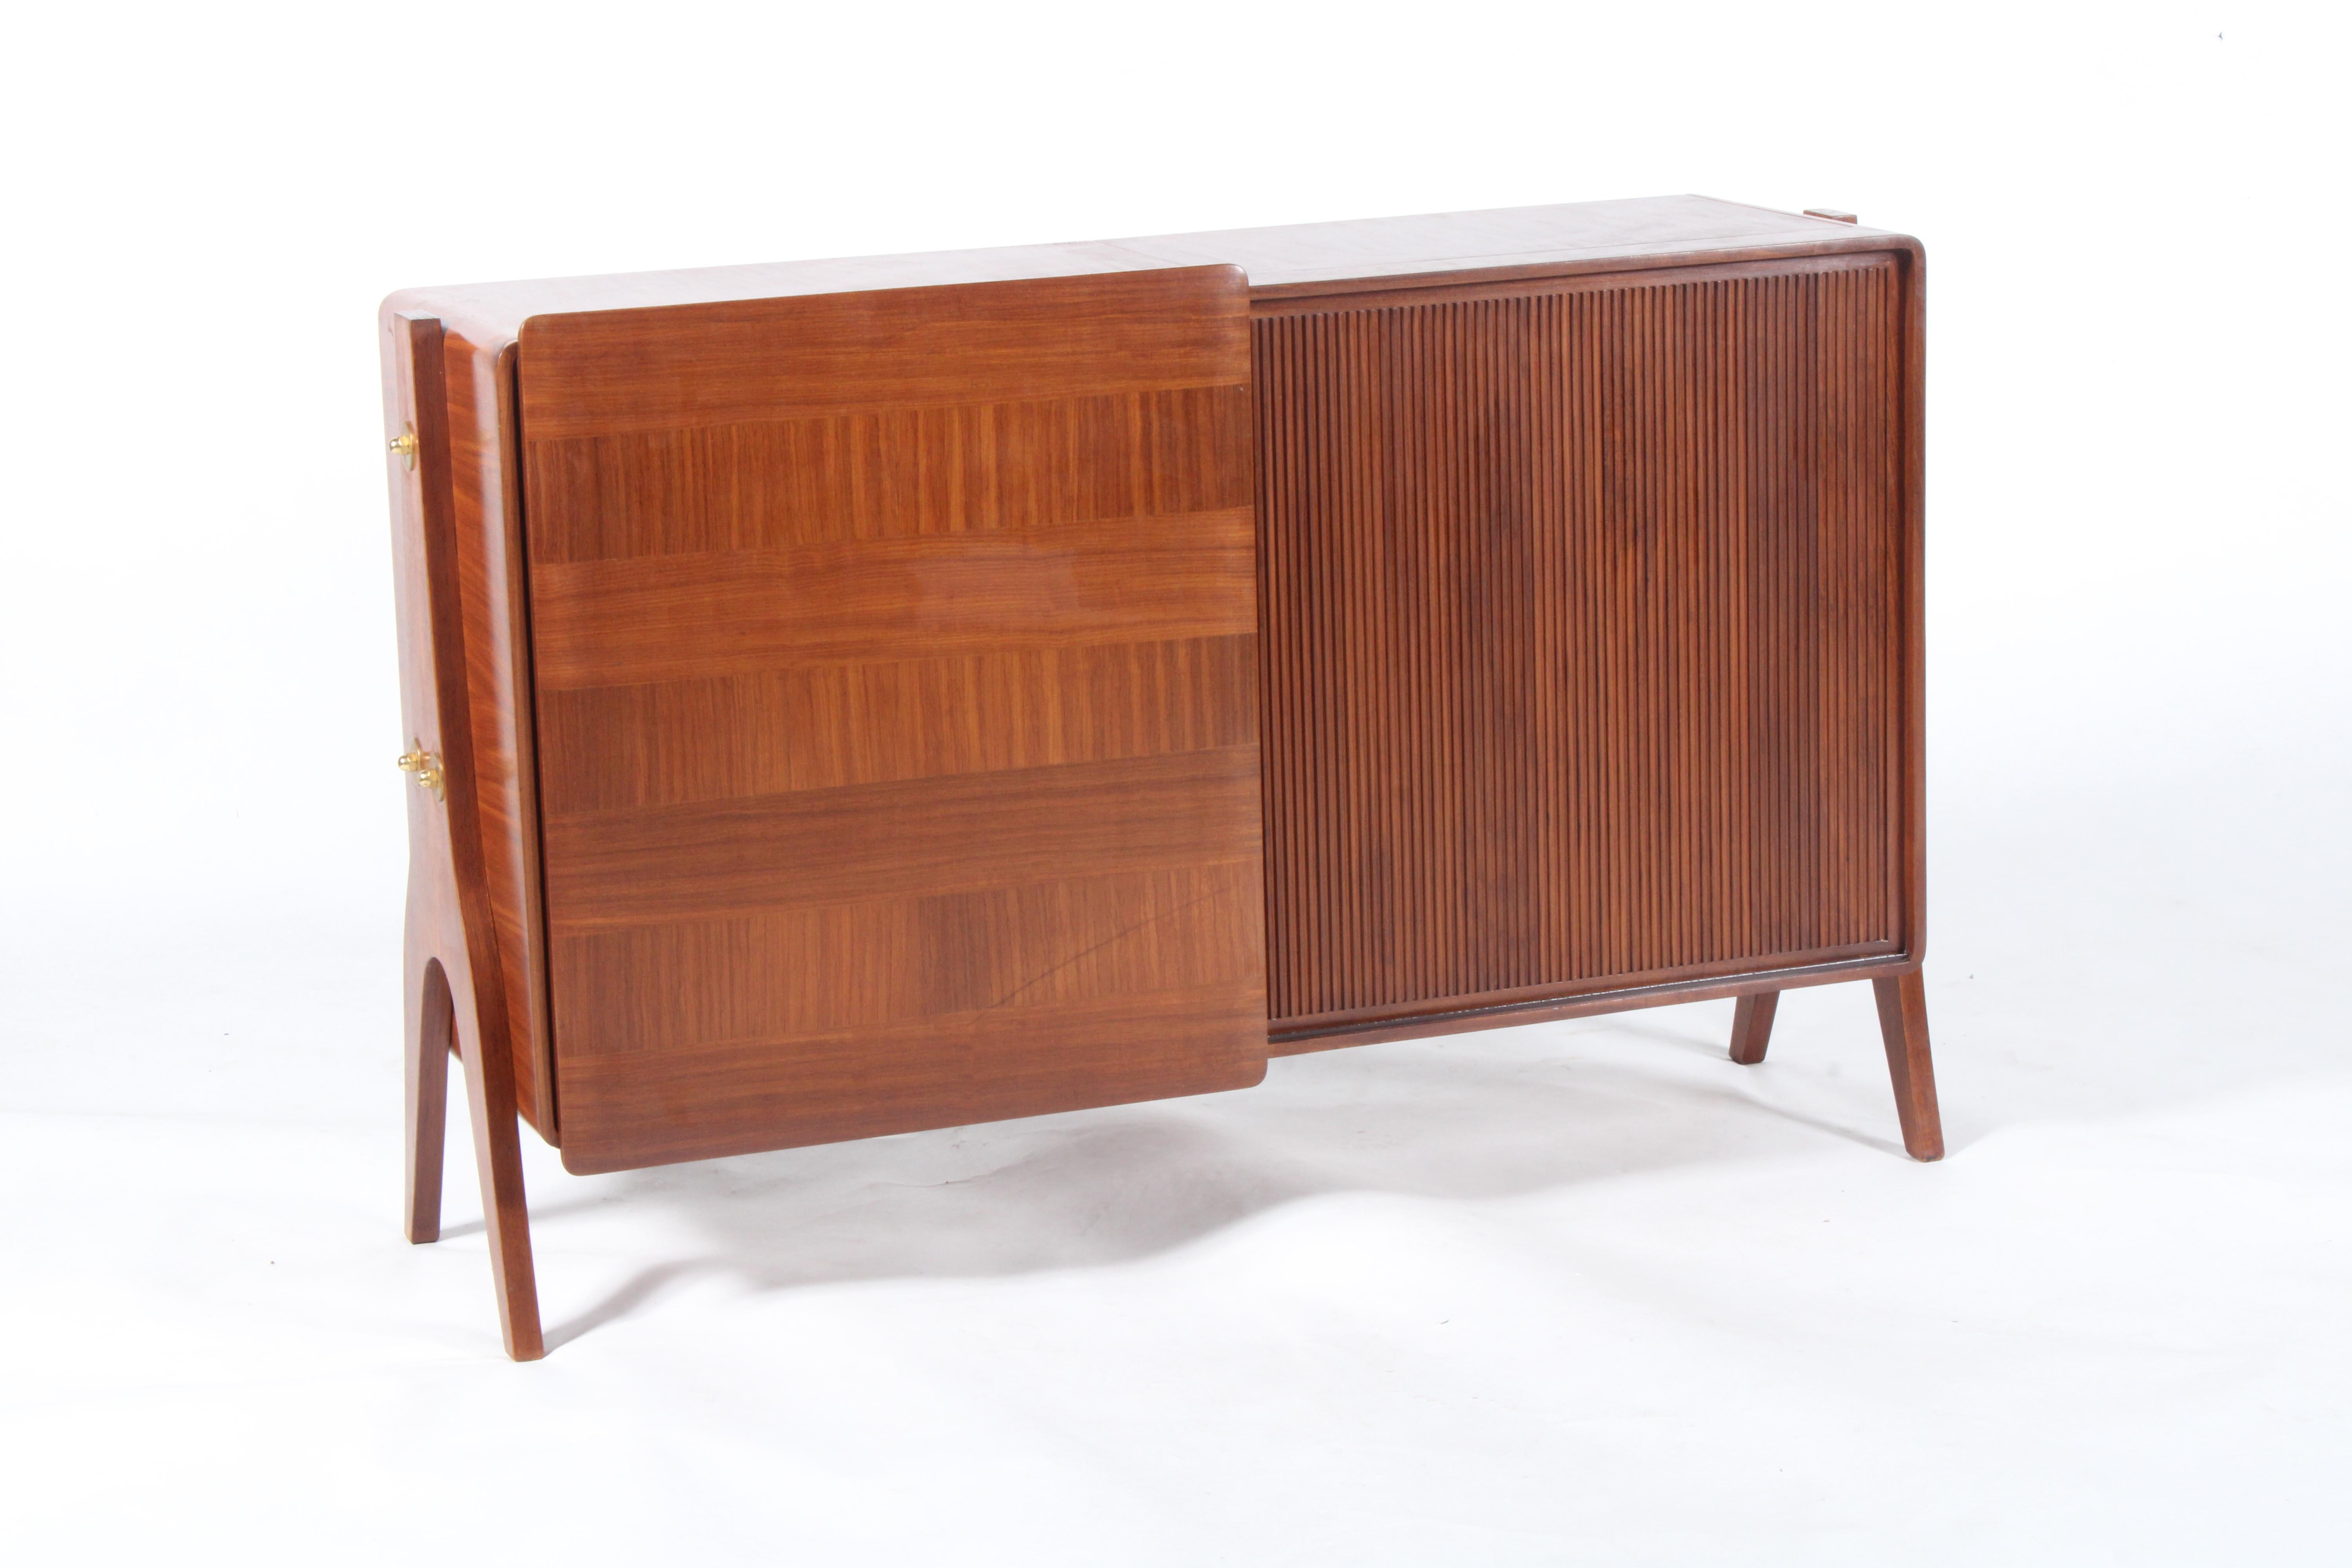 A super stylish original mid century Italian sideboard with ample storage on both sides. This delightful and unusual piece has the added benefit of being finished to both the front and rear and as such can be placed away from a wall or centrally in